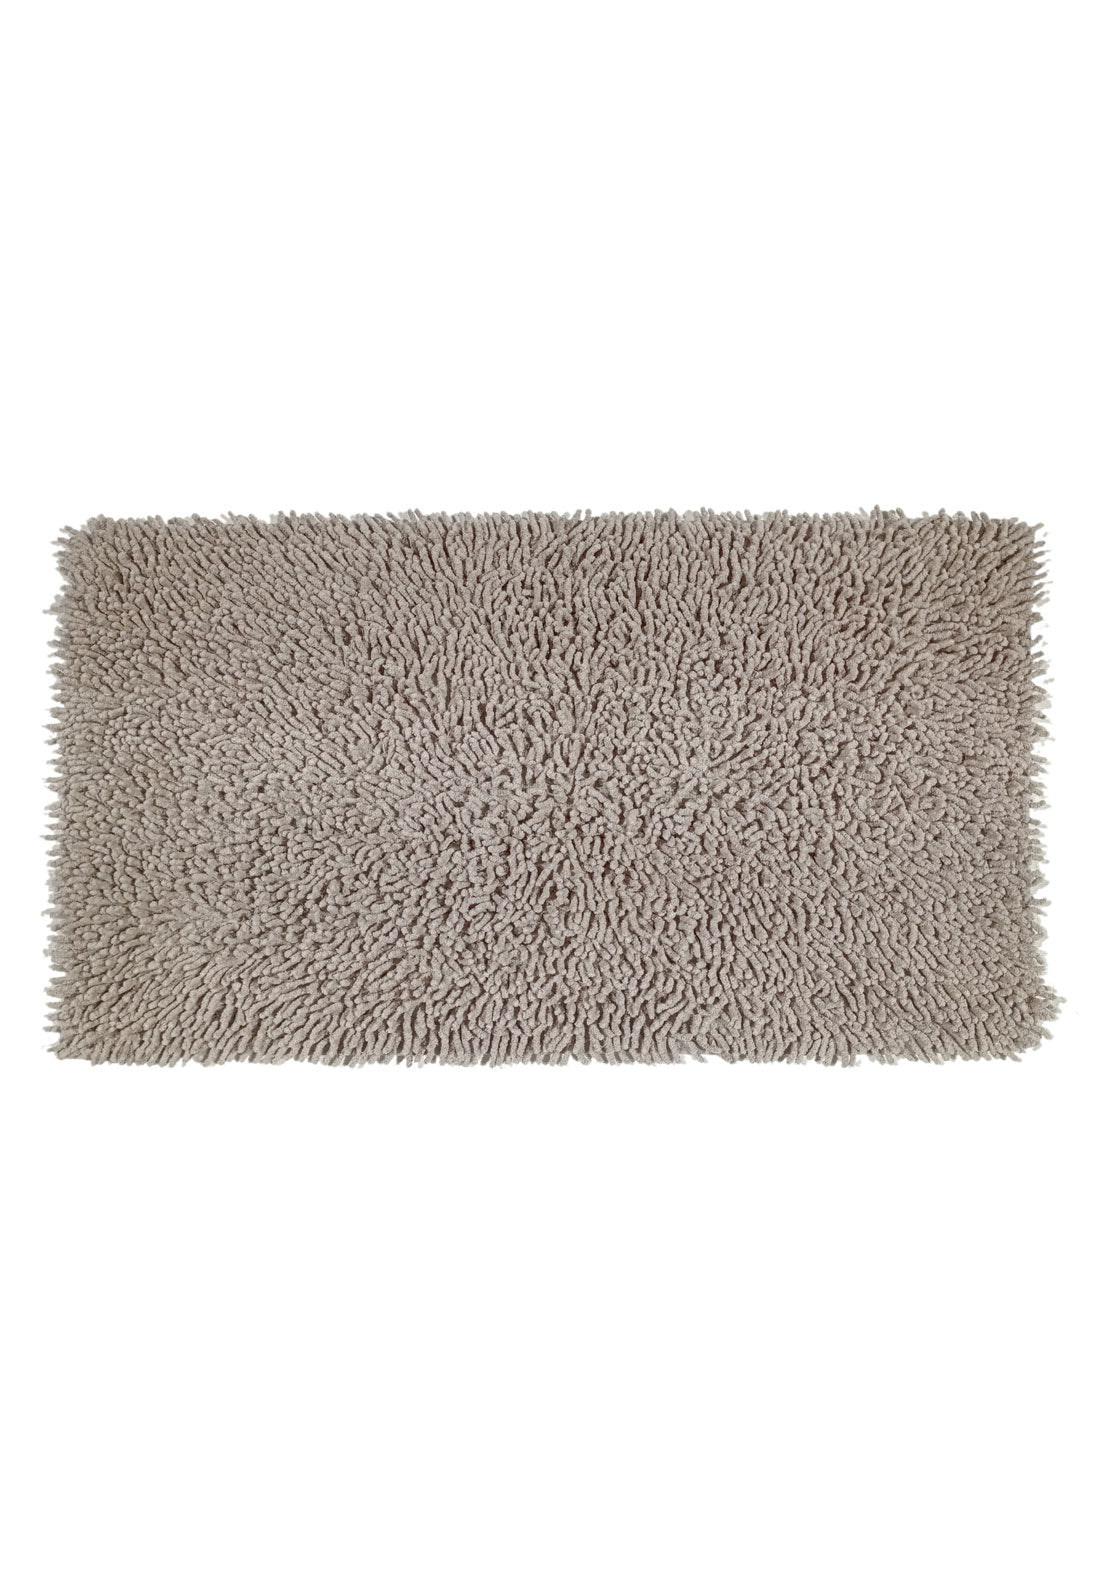 The Home Luxury Collection Cotton Loop Bathmats - Taupe 1 Shaws Department Stores